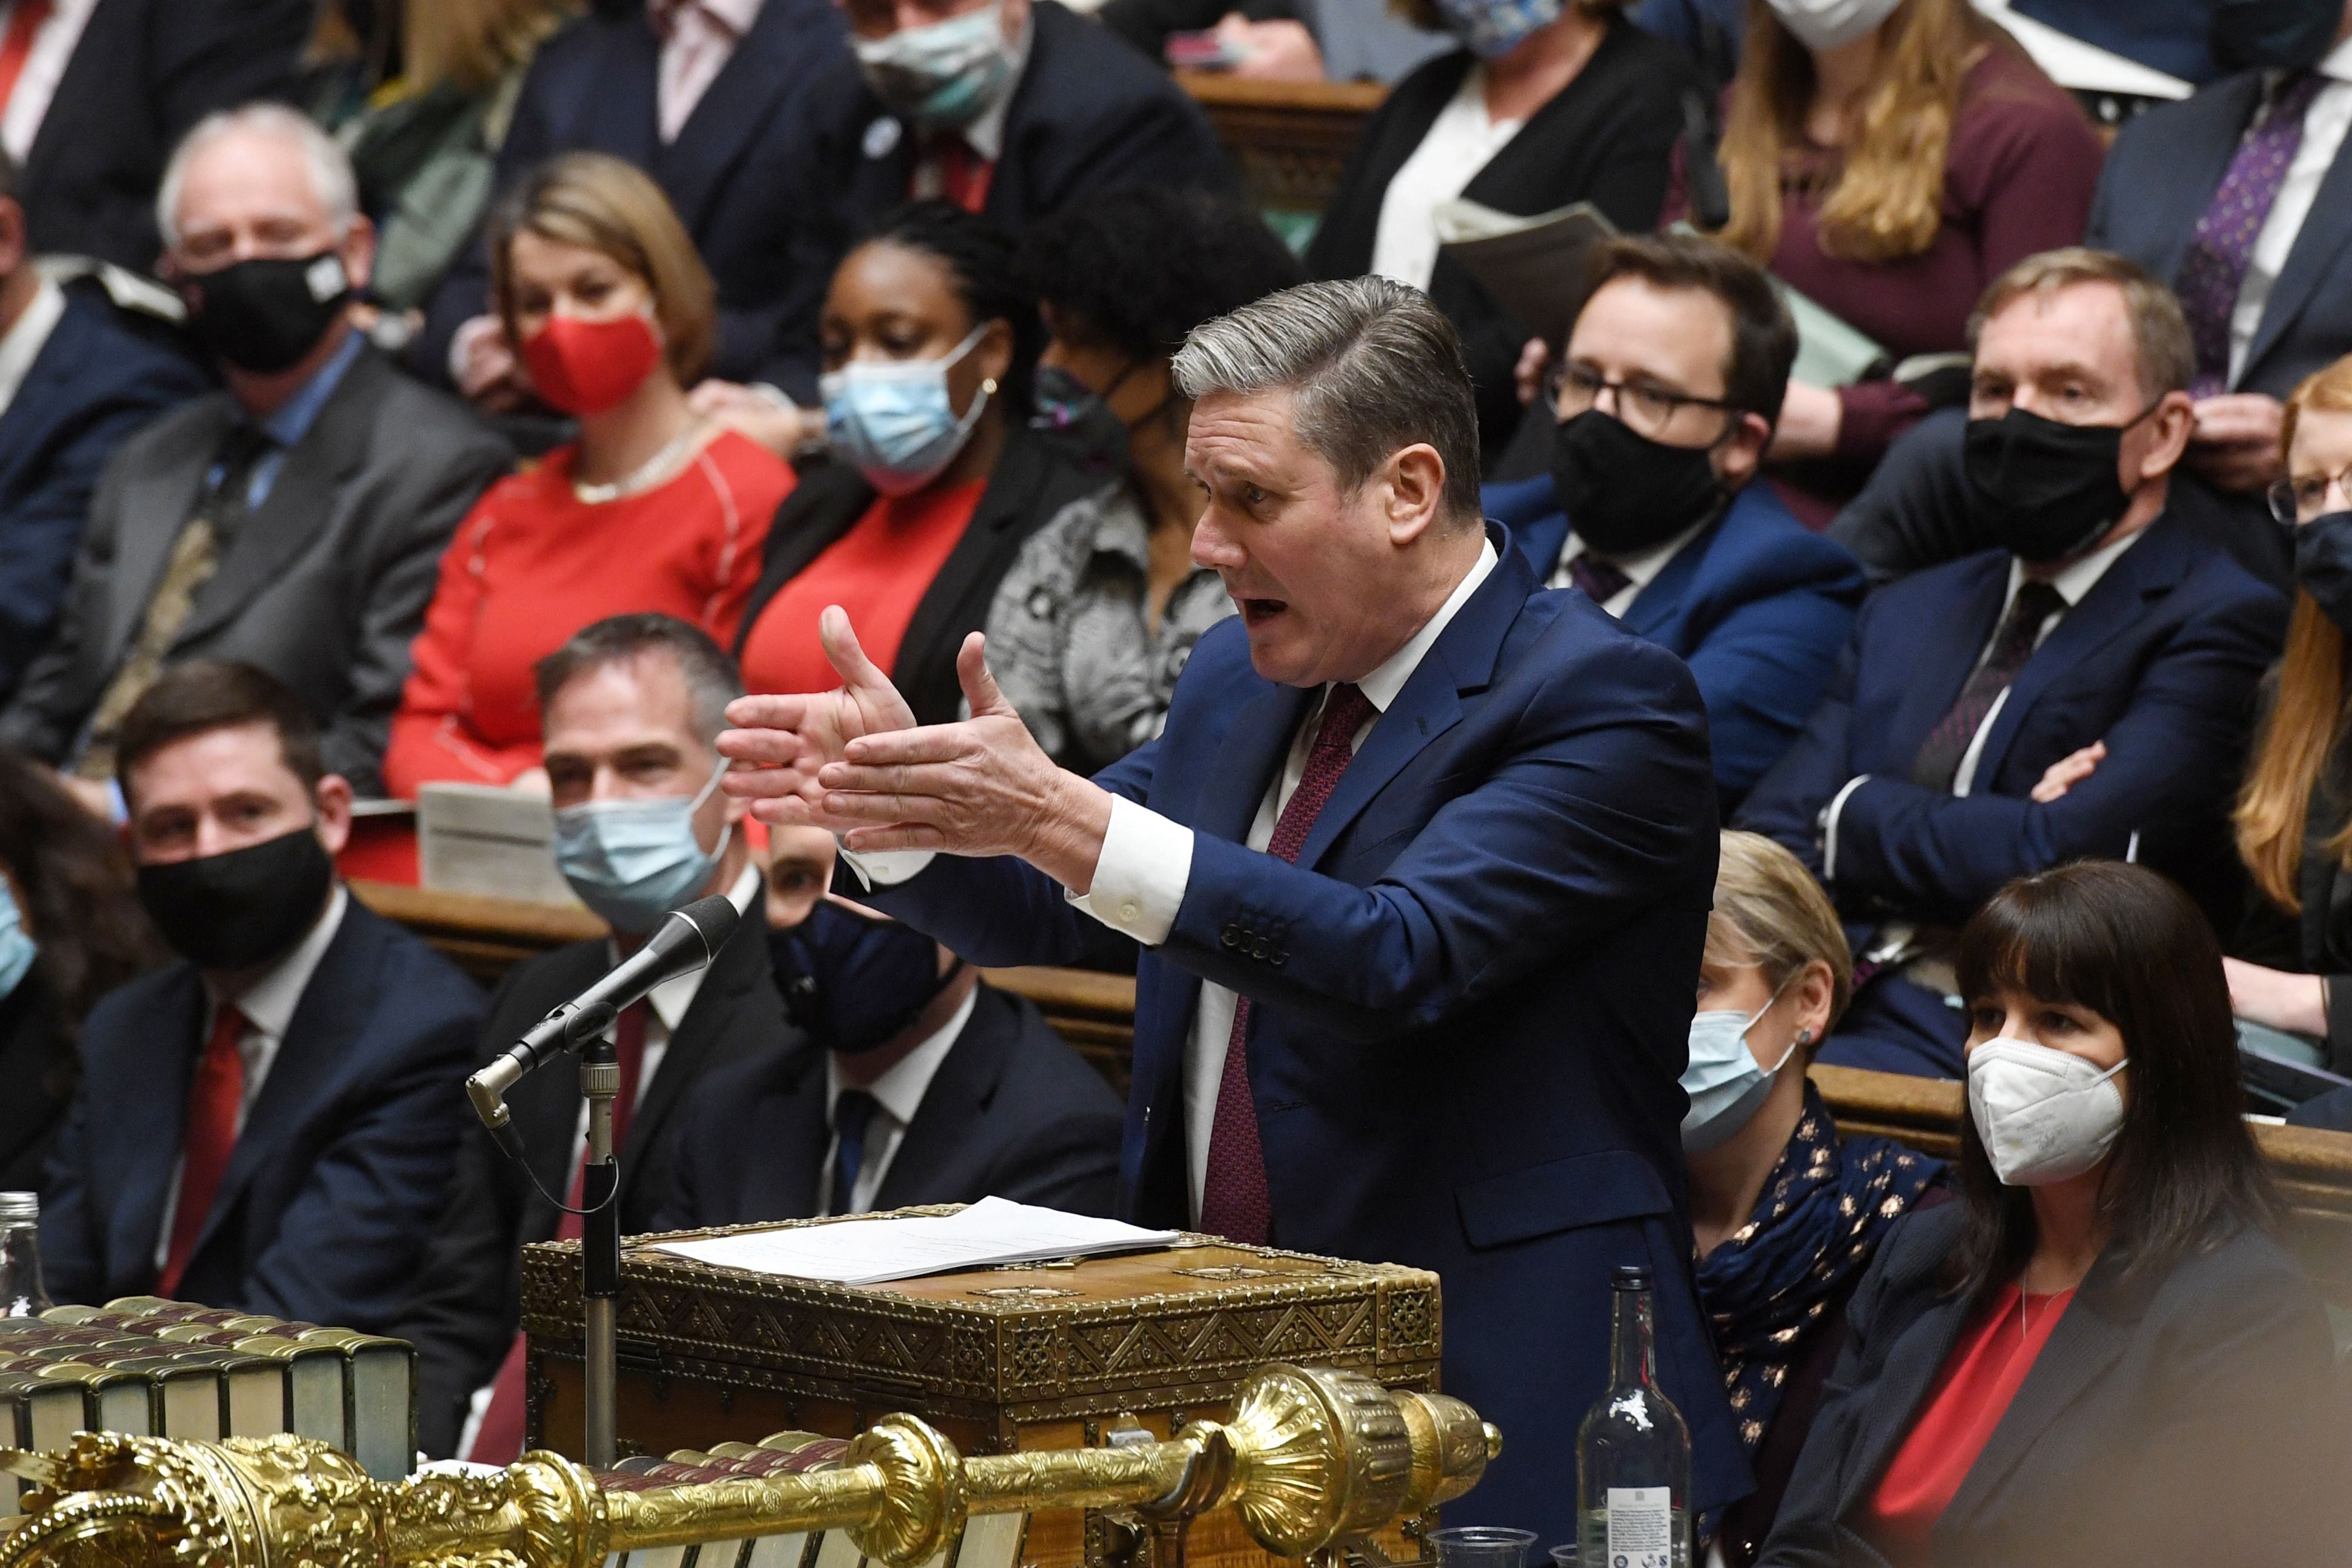 Keir Starmer speaking during Prime Minister's Questions last month